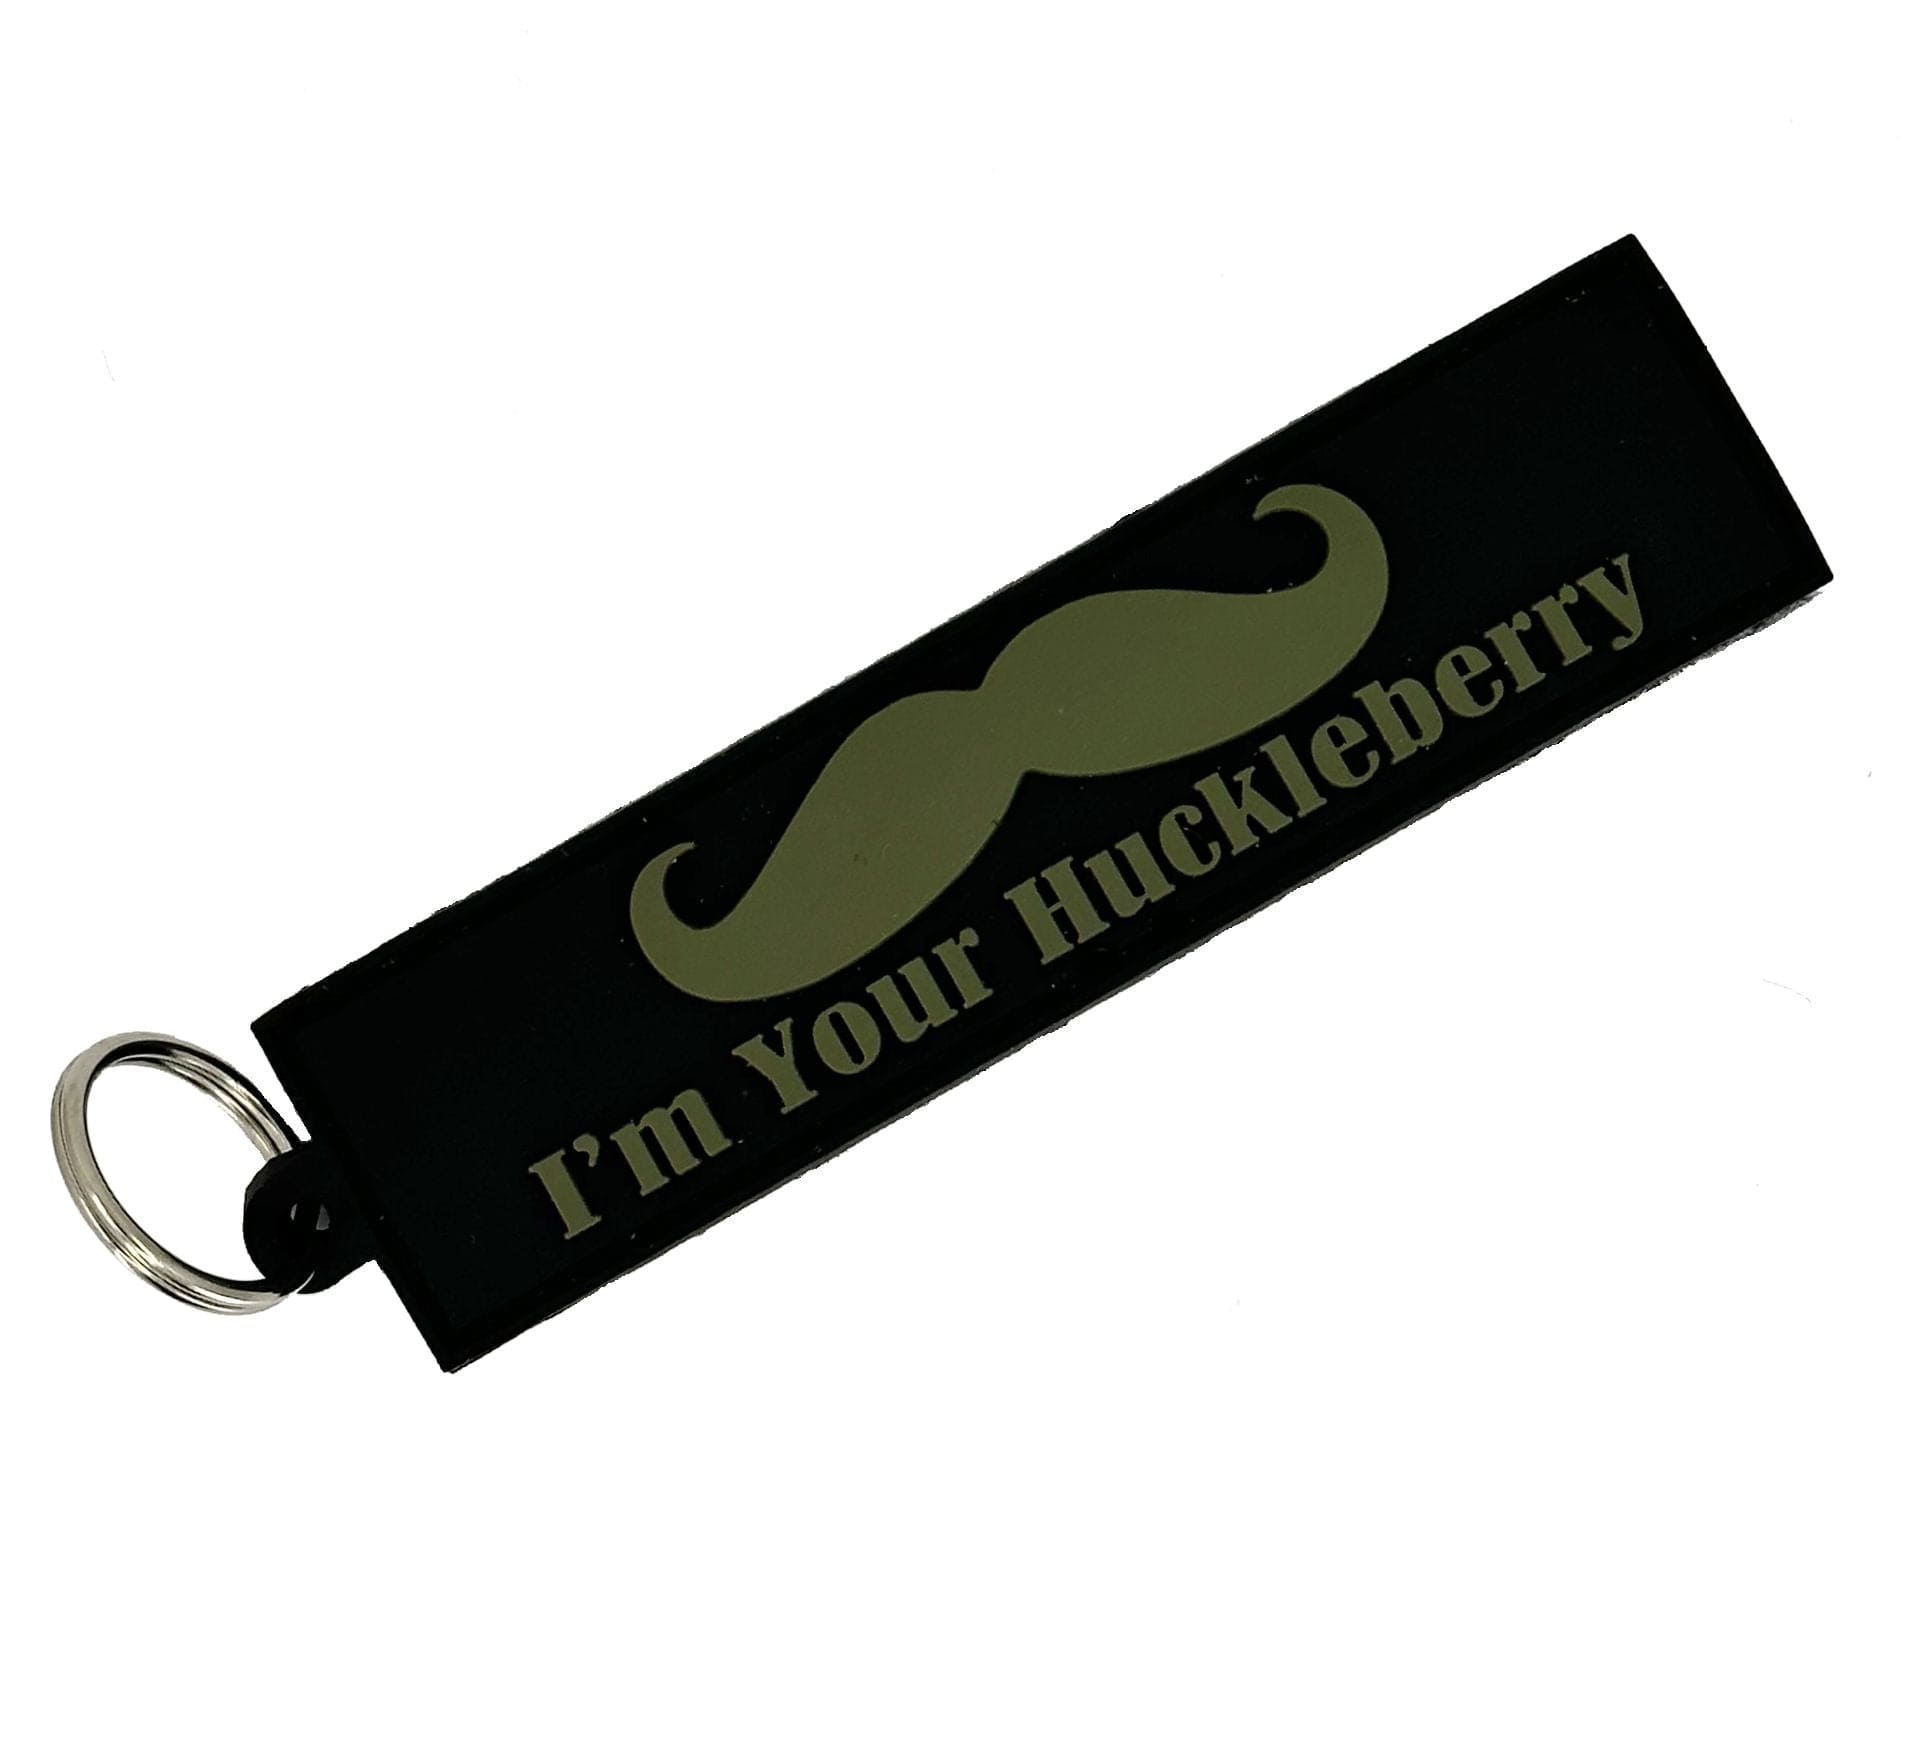 Tactical Gear Junkie Patches Black w/Olive Drab I'm Your Huckleberry - American Made - PVC Patch/Keychain